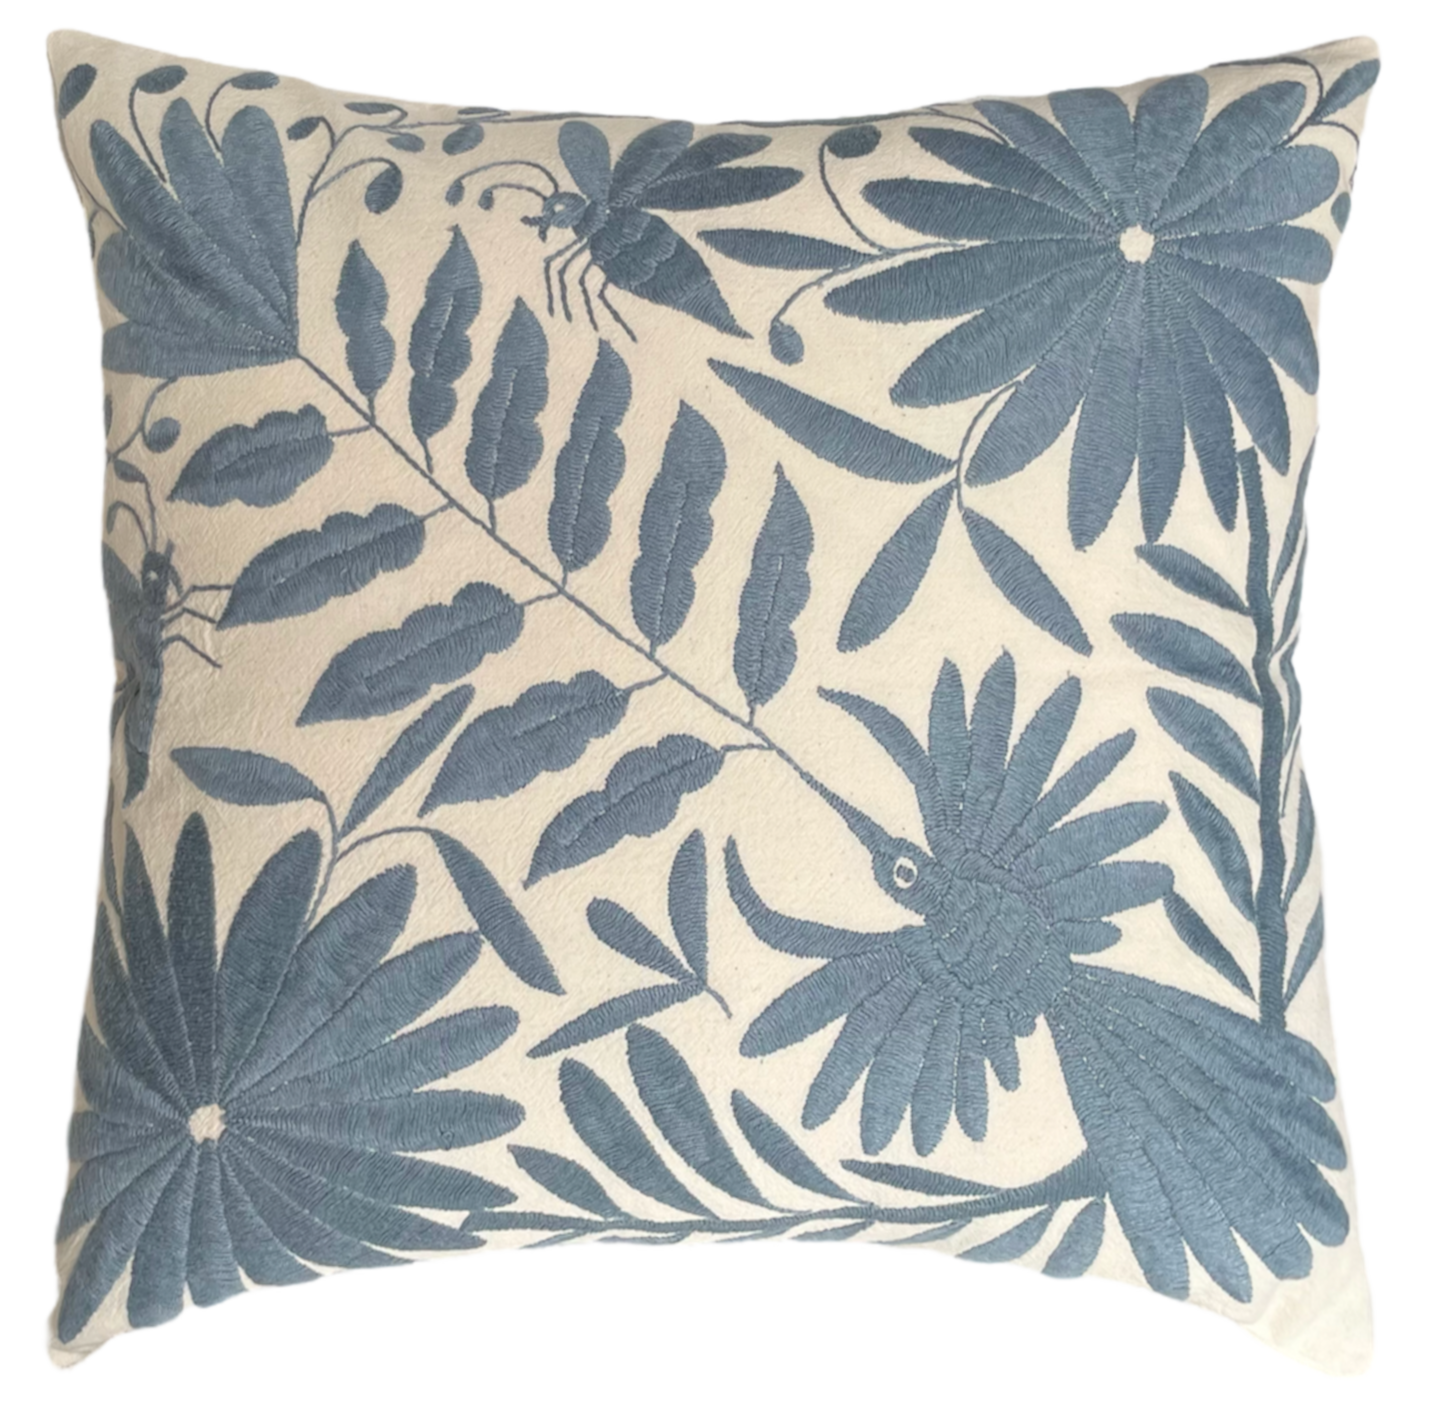 OTOMI embroidered cushion, gray